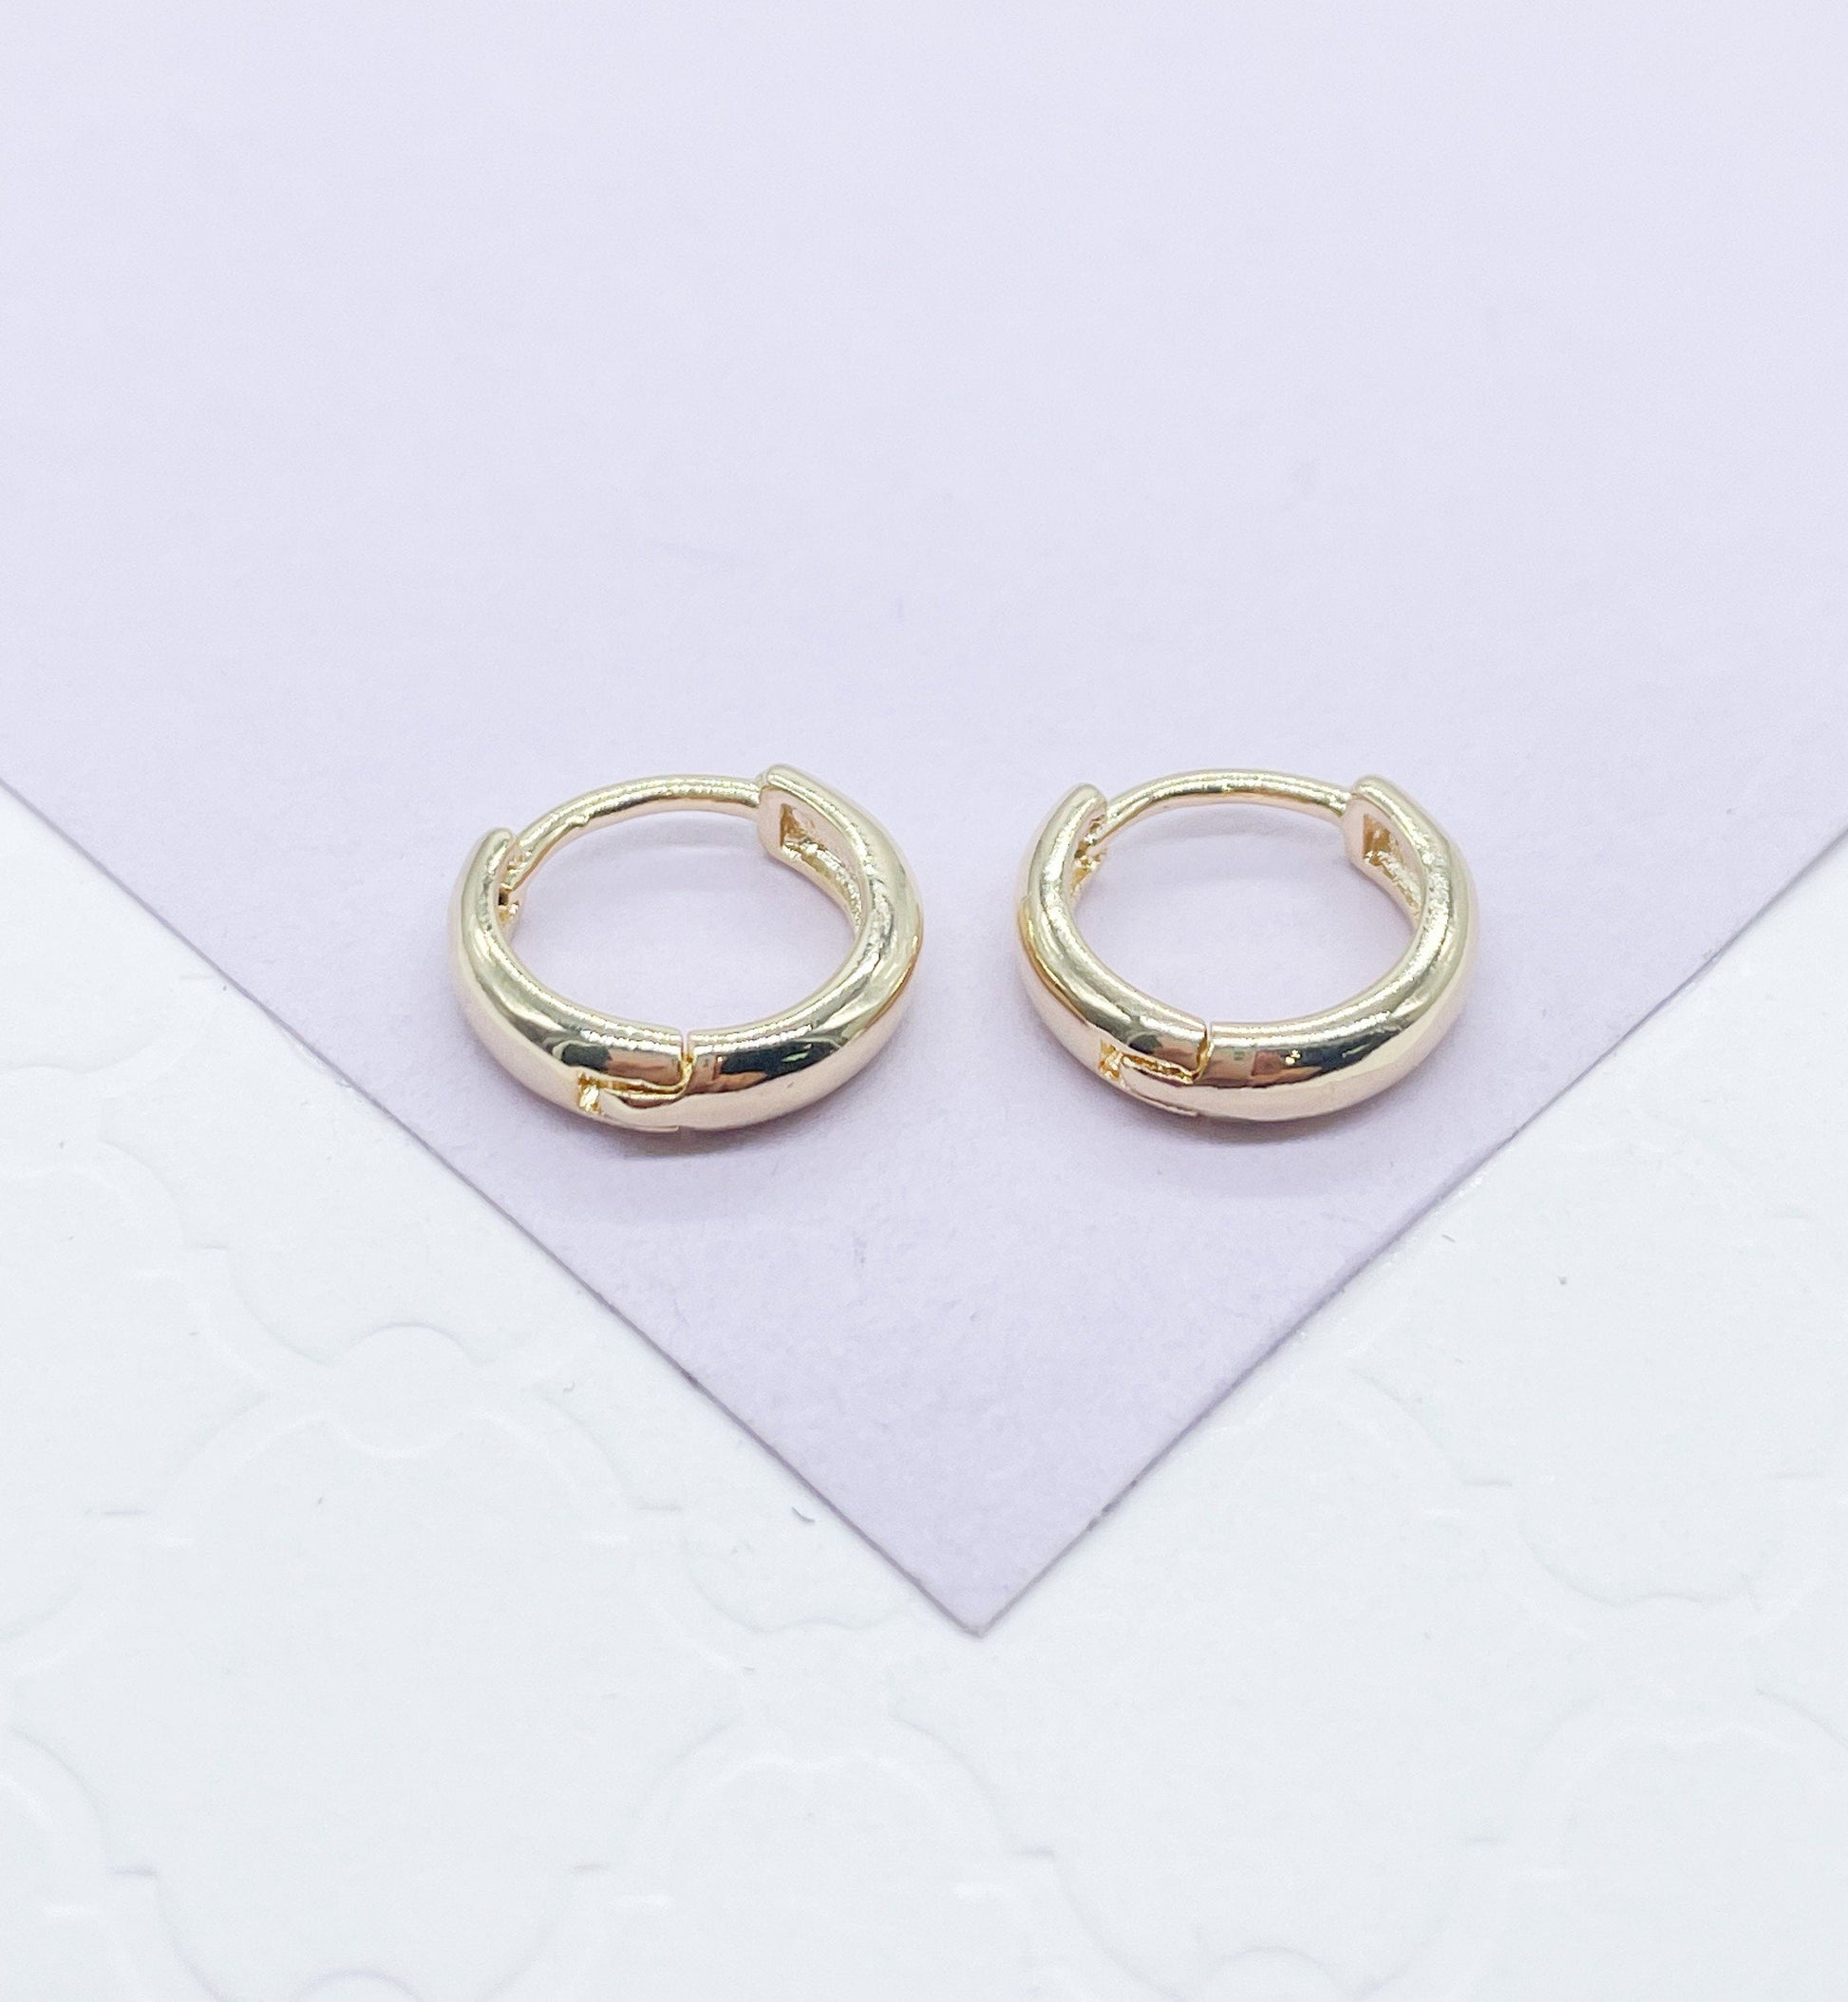 18k Gold Filled Plain Extra Small Huggie Earring